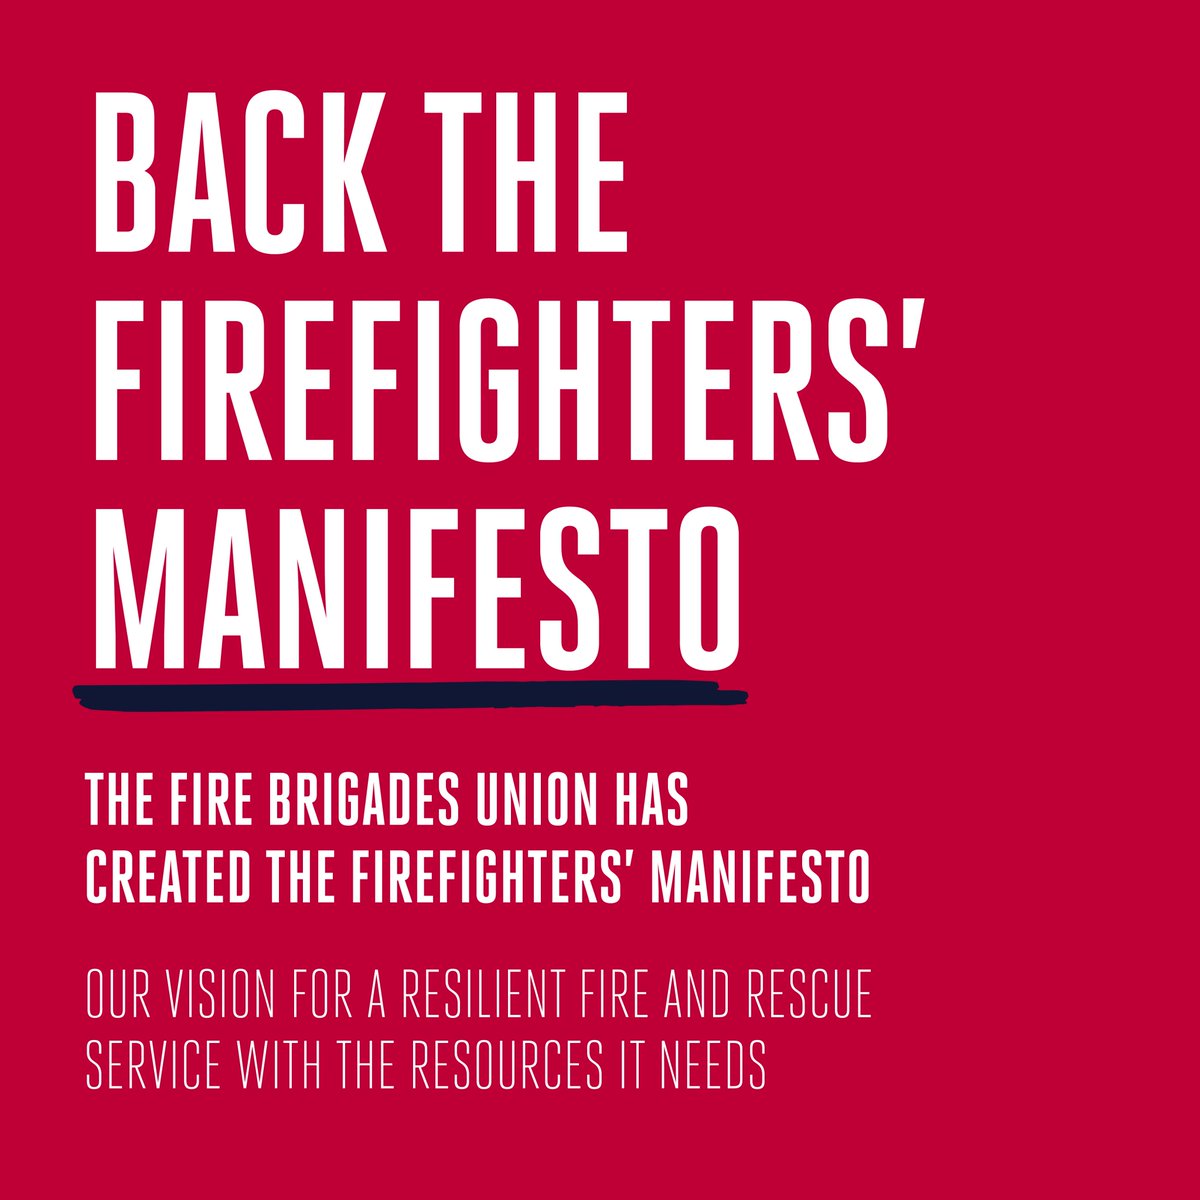 ❌1 in 5 firefighters jobs axed since 2010 📉Response times at record highs ✂️Crewing levels cut There's a better way forward. Email your MP and call on them to back the manifesto for a better future for our fire service - fbu.eaction.org.uk/FirefightersMa…